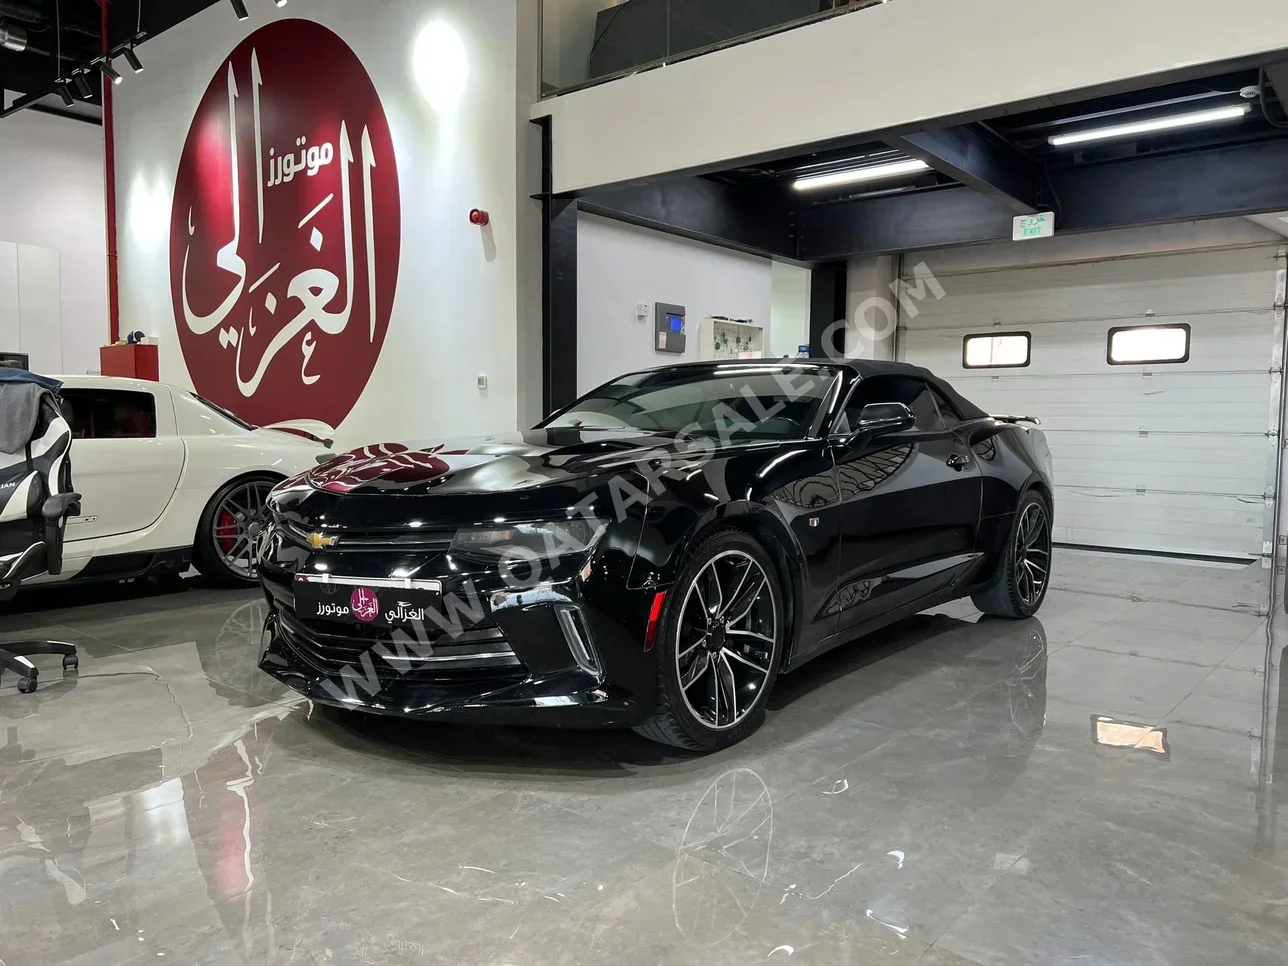  Chevrolet  Camaro  2018  Automatic  123,000 Km  6 Cylinder  Rear Wheel Drive (RWD)  Convertible  Black  With Warranty